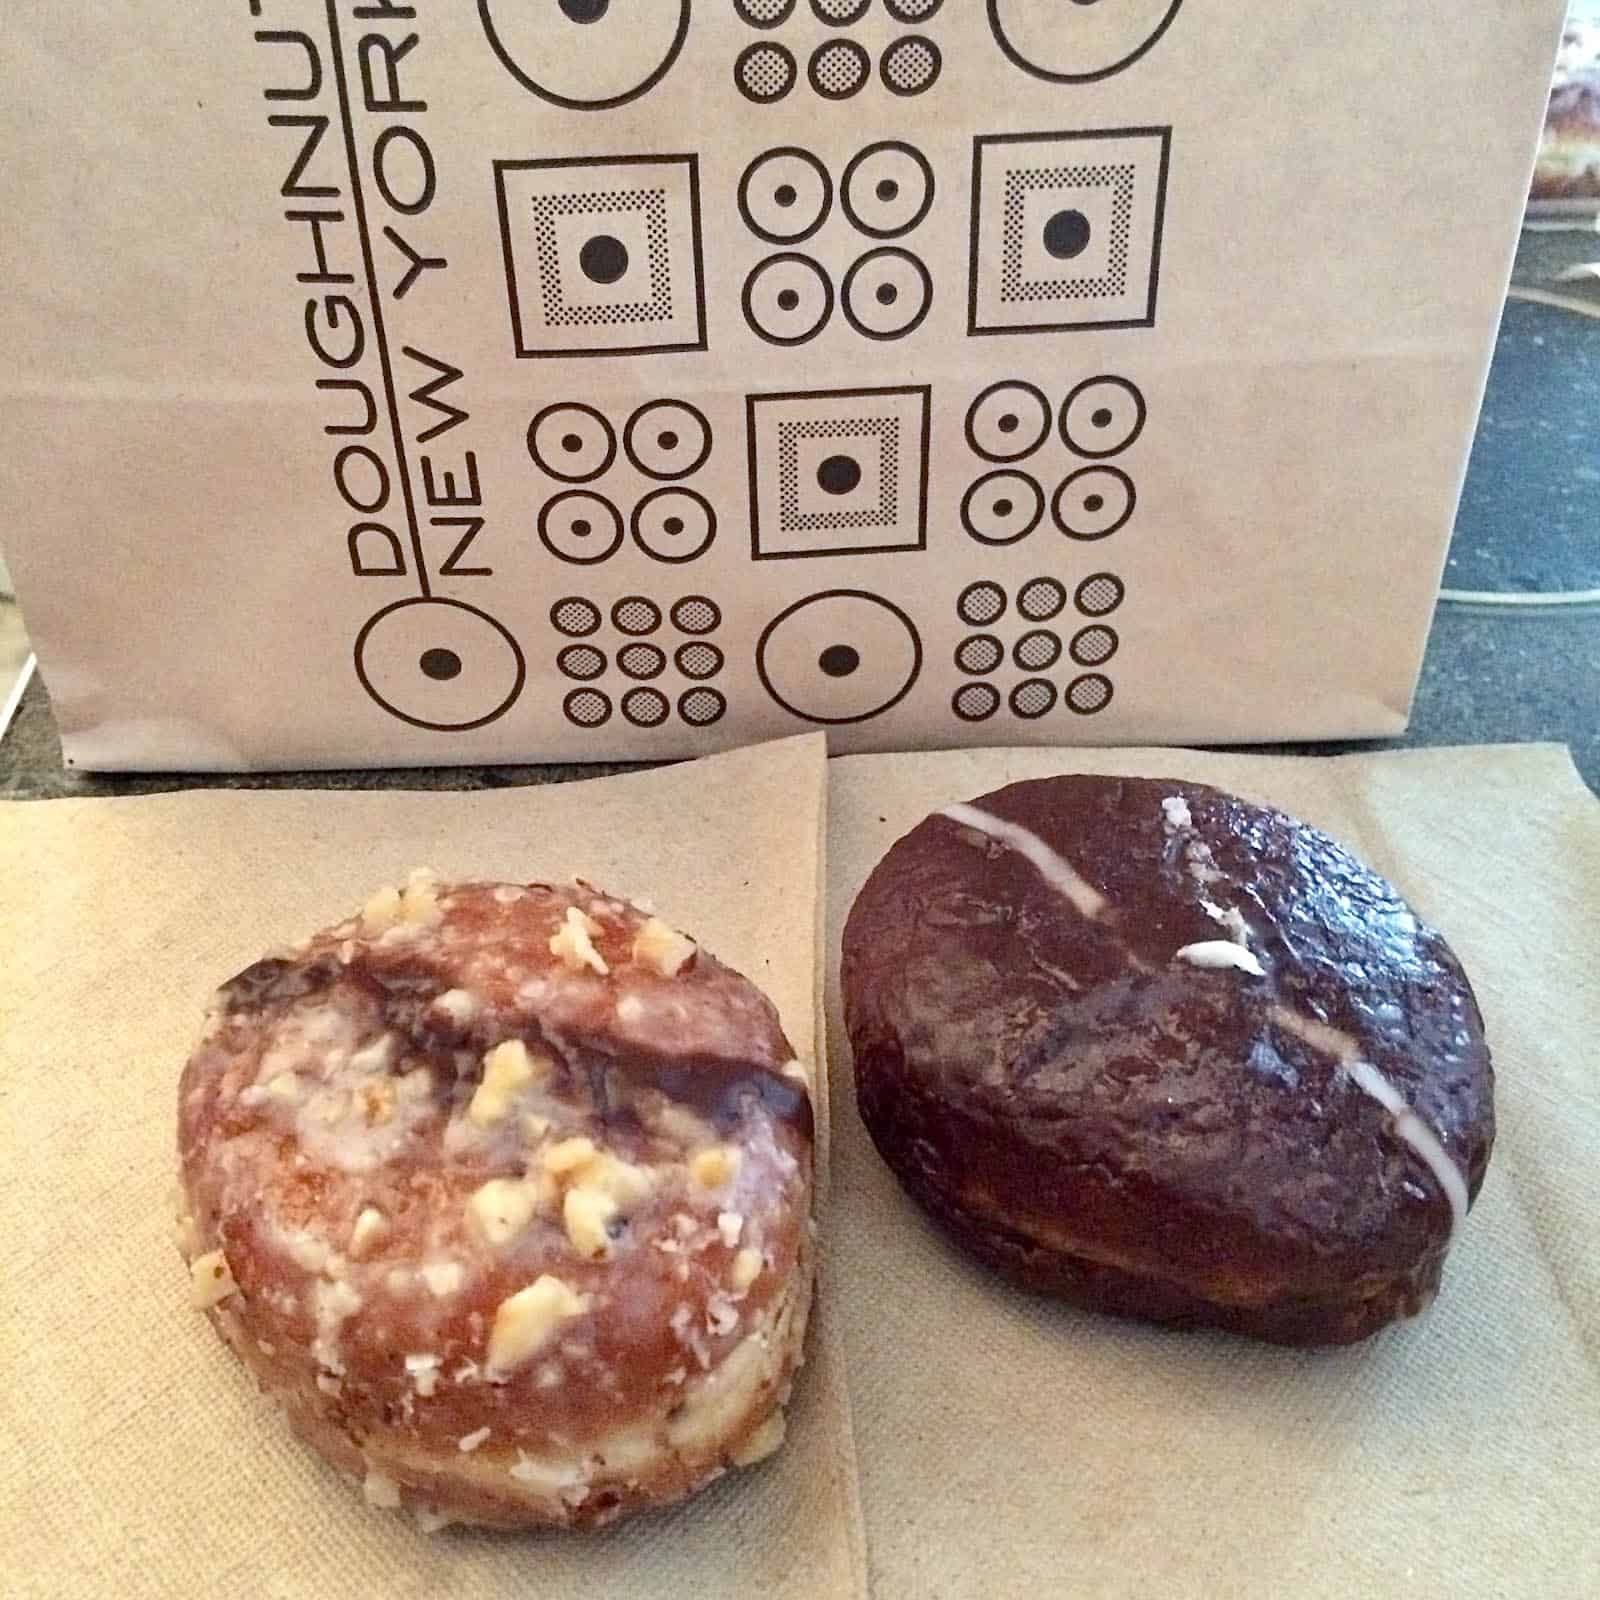 Two doughnuts from Doughnut Plant NYC next to bag.